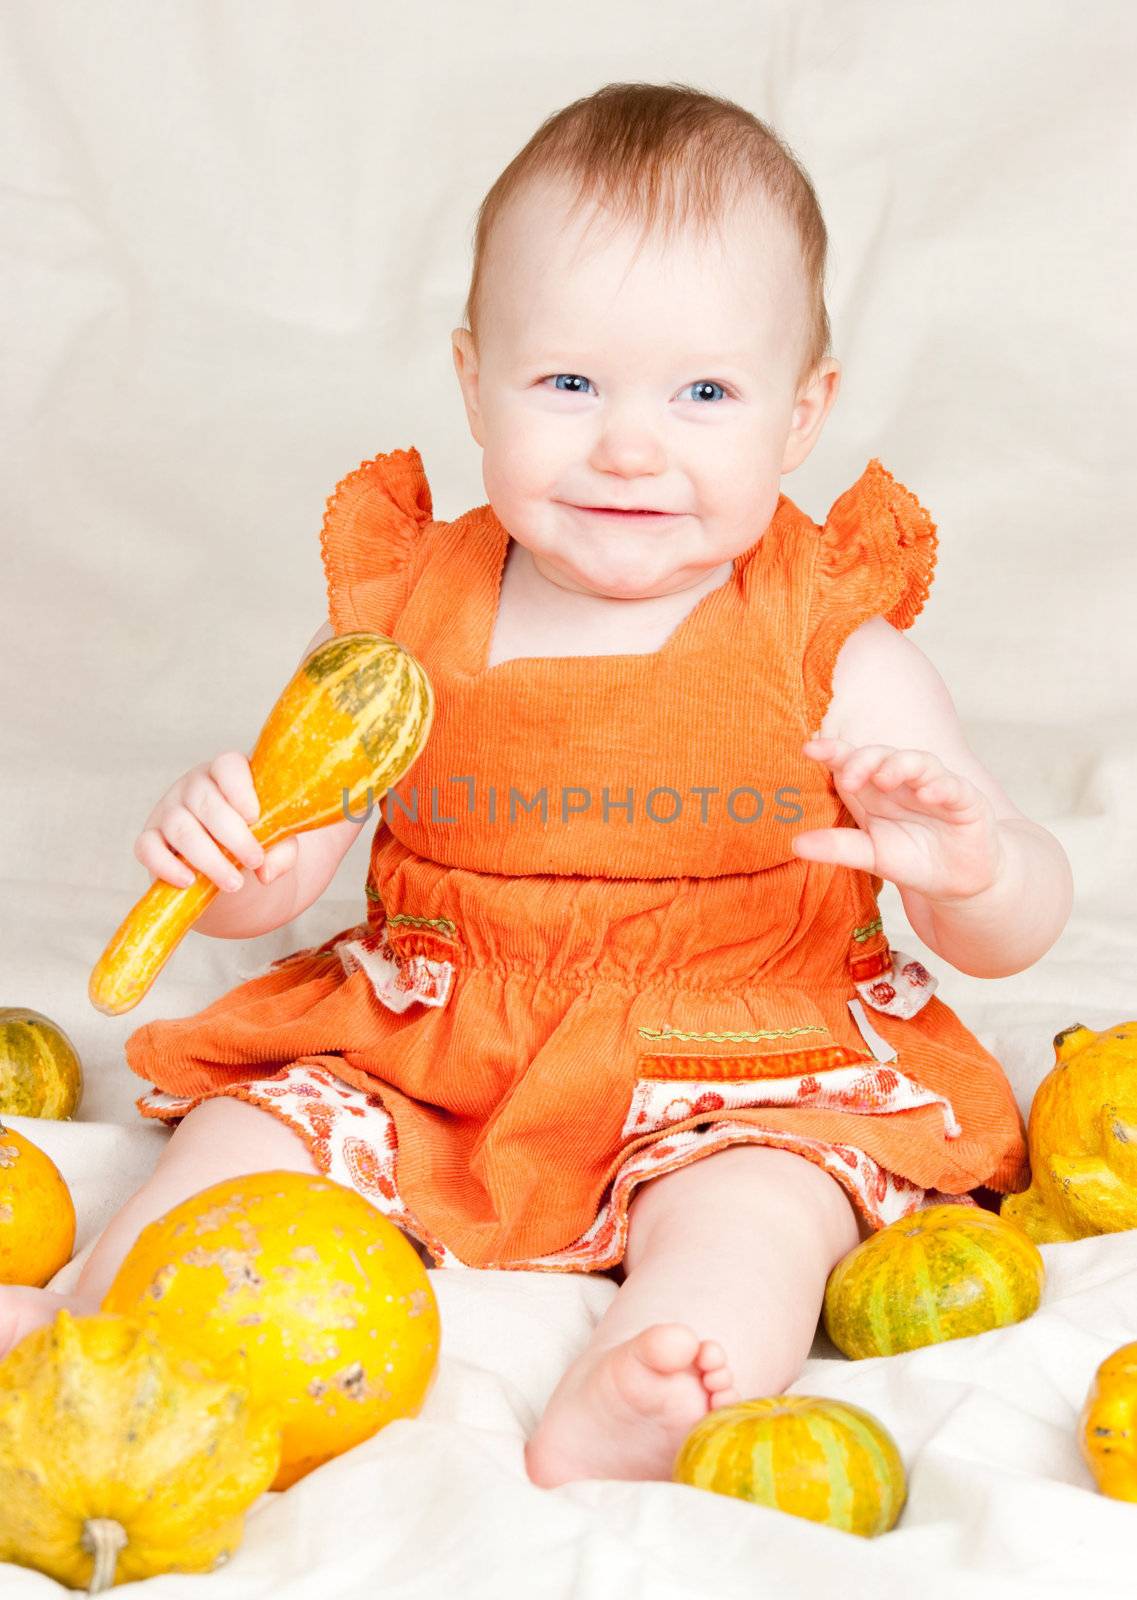 Infant with pumpkins by naumoid